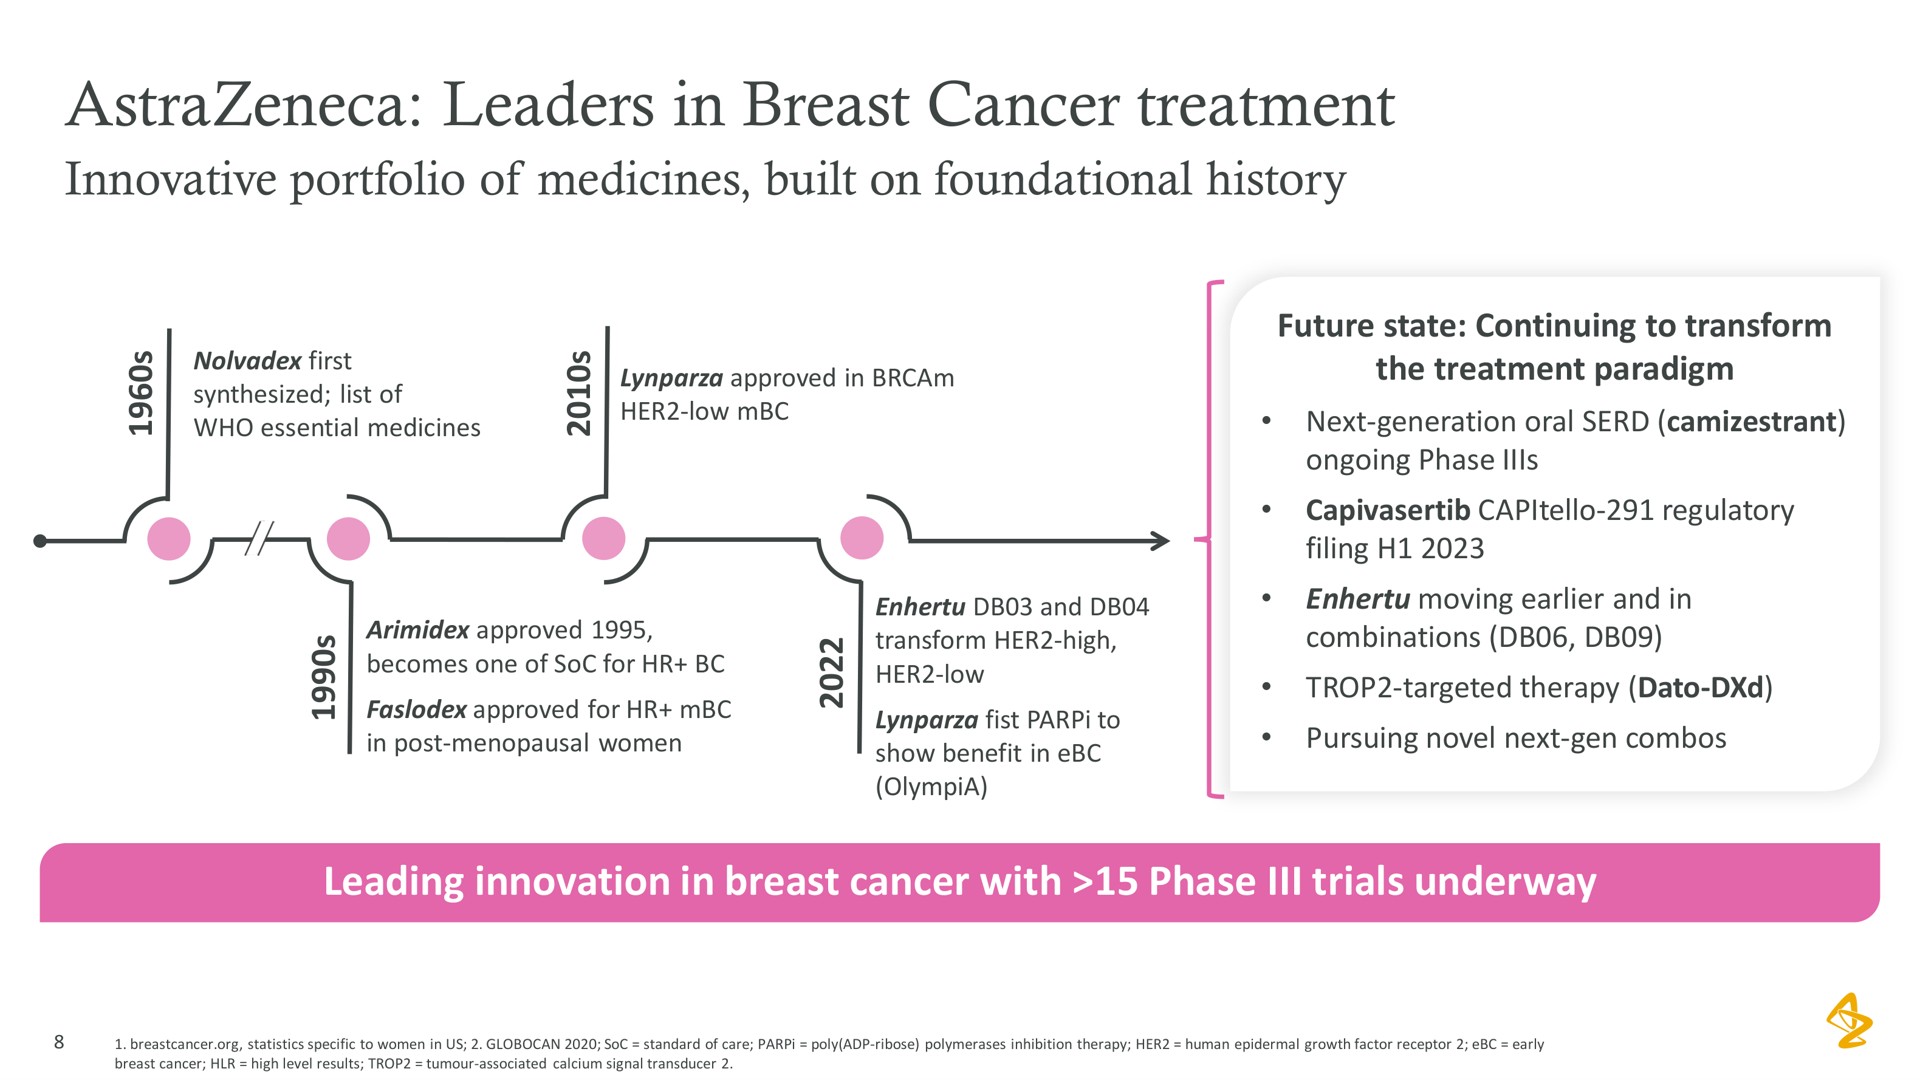 leaders in breast cancer treatment | AstraZeneca